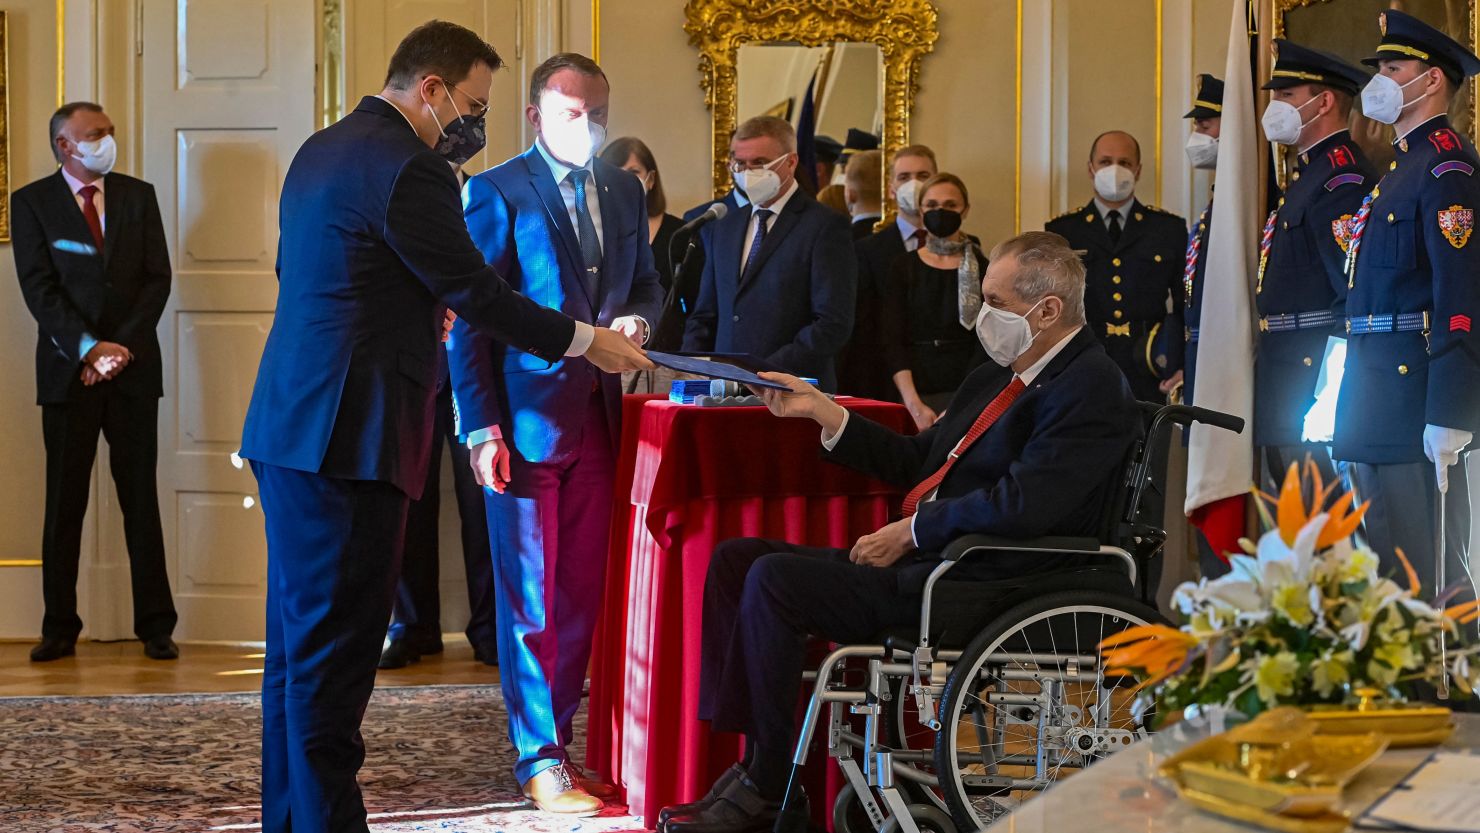 Czech Foreign Minister Jan Lipavsky (left) receives his certificate of appointment by Czech President Milos Zeman (right) during a appointment ceremony of the new Czech cabinet, on December 17, 2021.